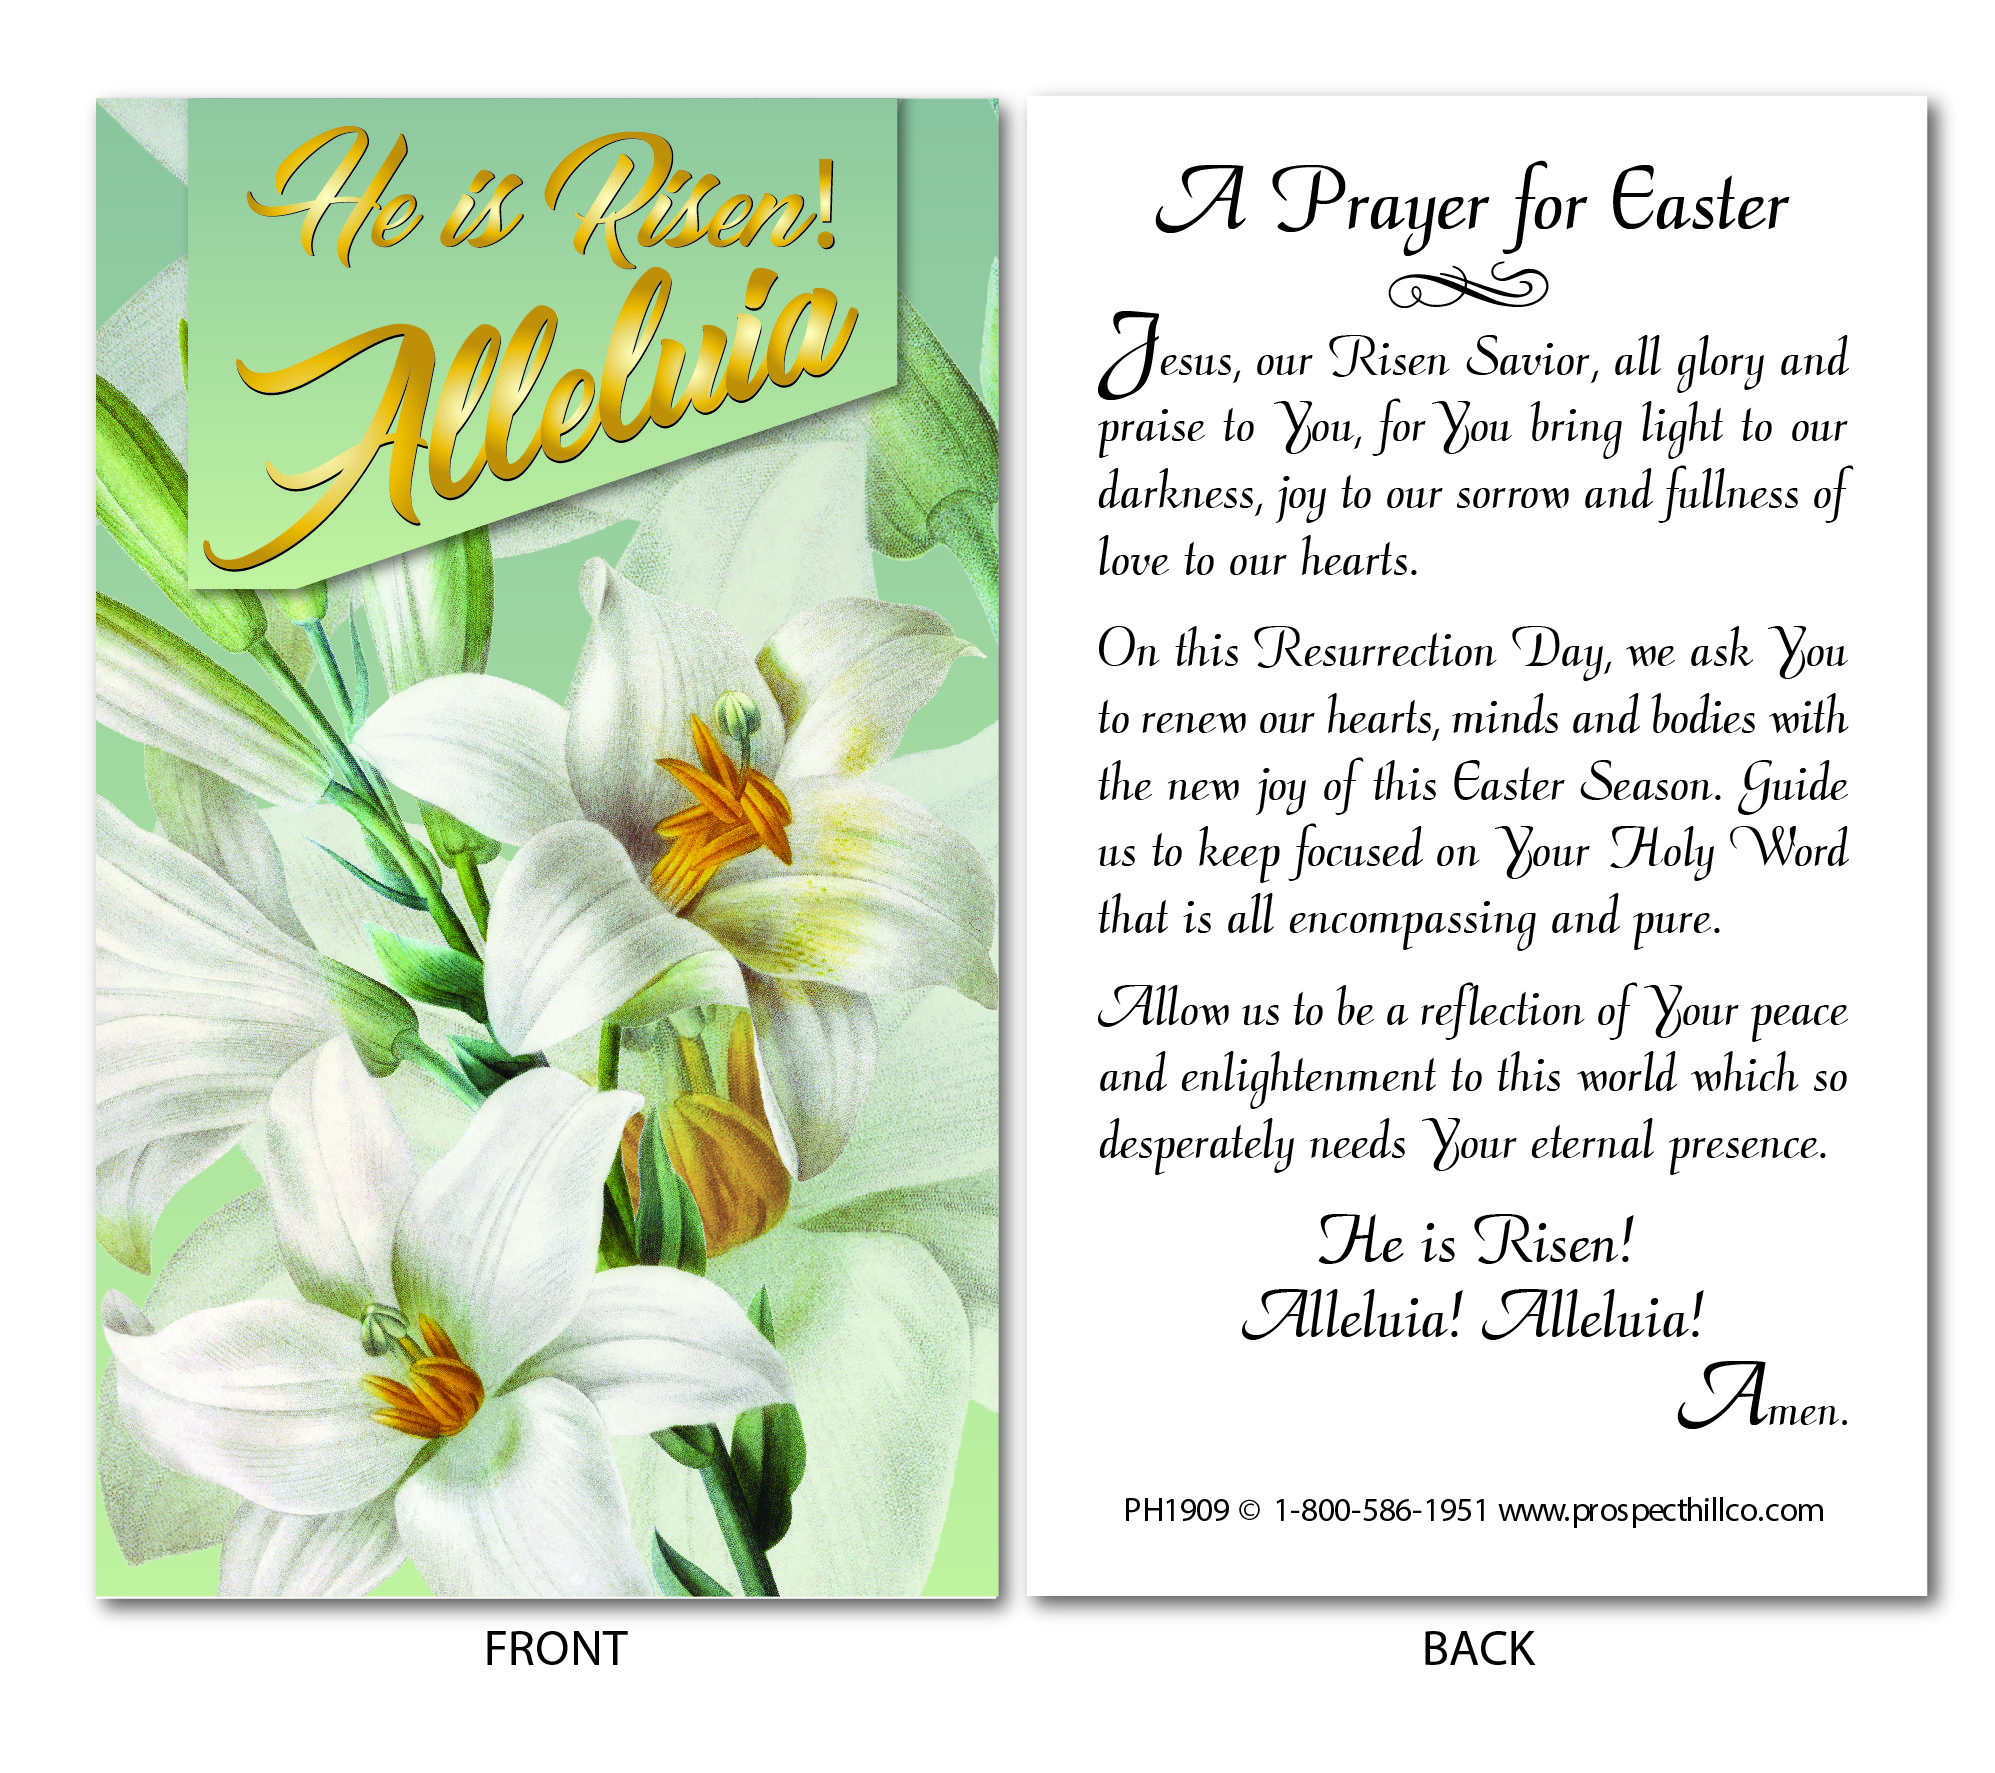 Download A Prayer for Easter (100 Count) - Prospect Hill Co.